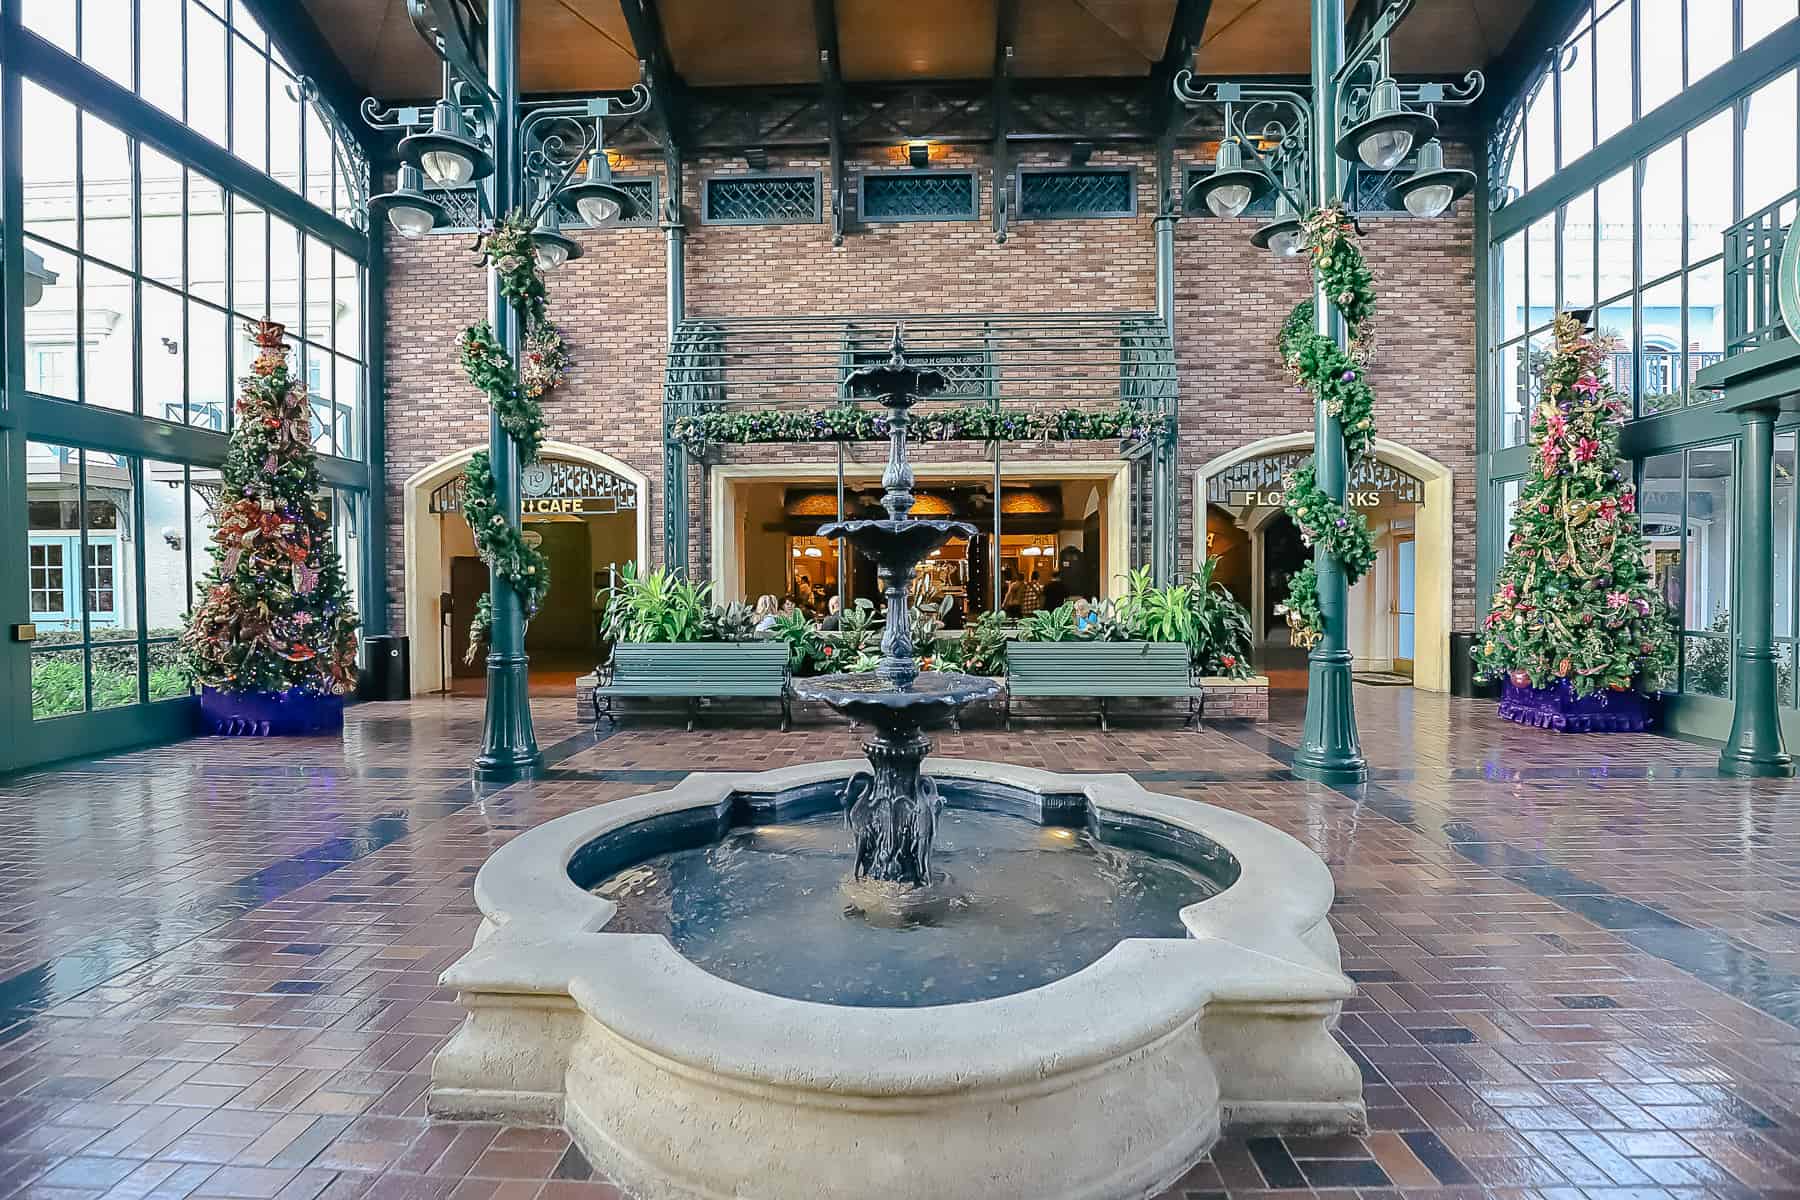 A fountain in the center of the lobby with garland wrapped around the columns.  